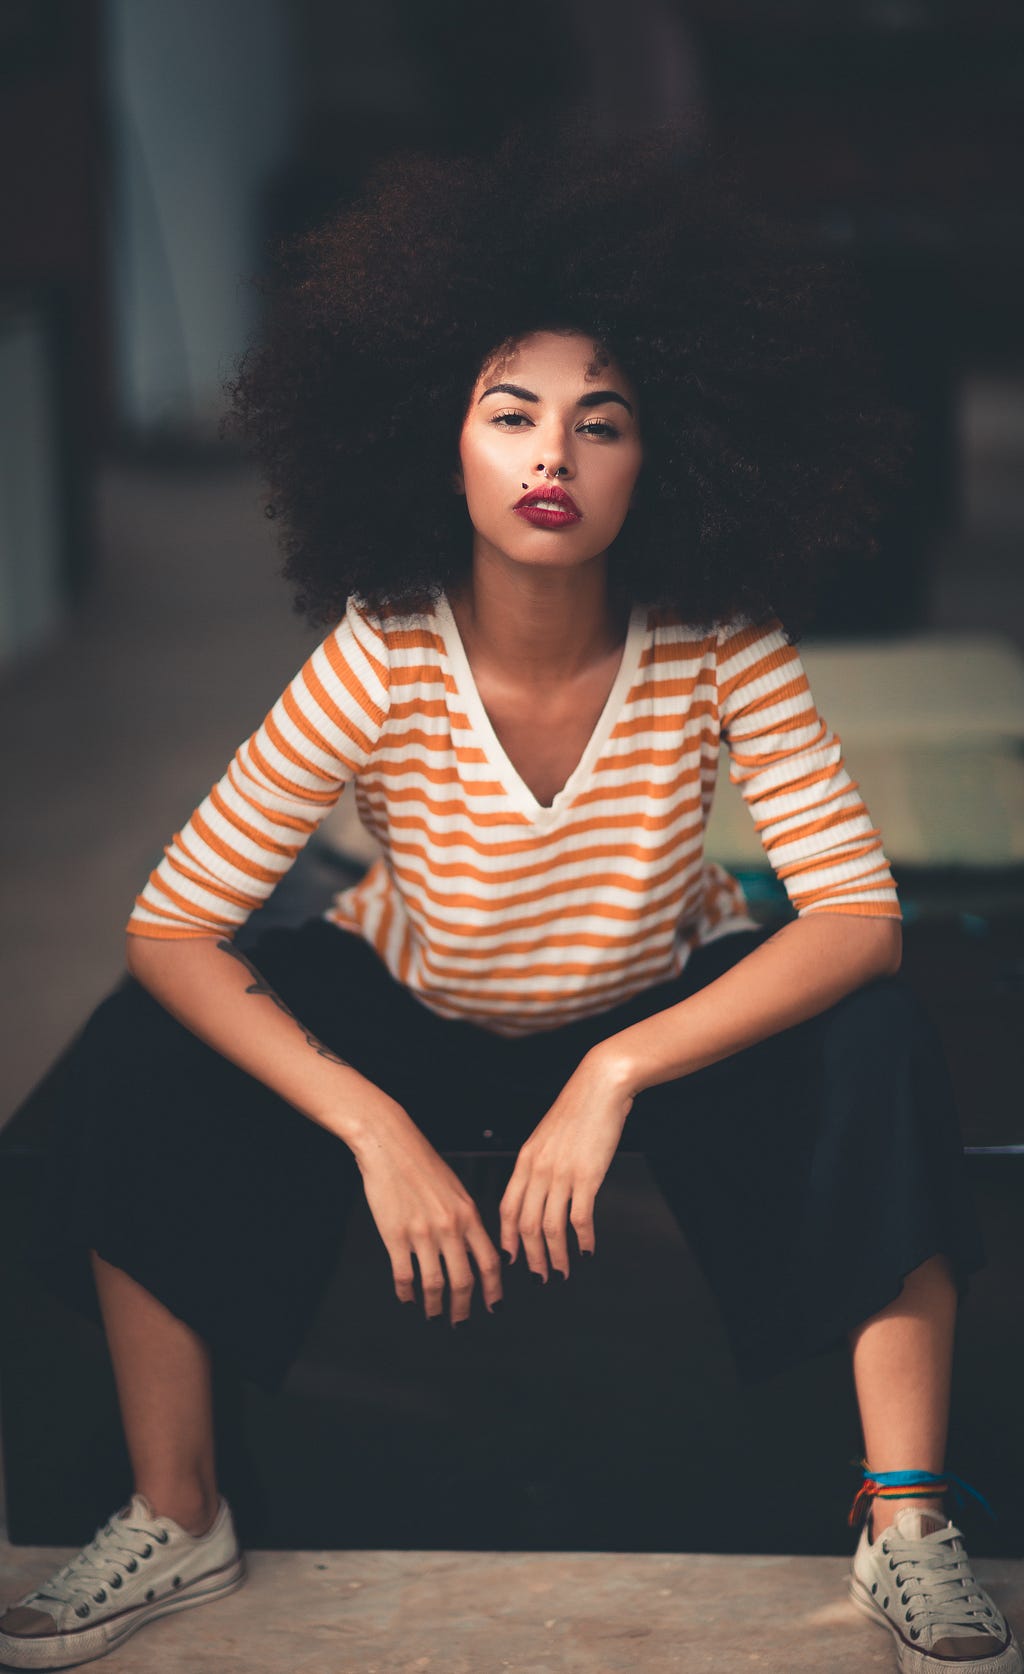 A black woman with an afro is sitting down. She is wearing a striped white and orange shirt with black pants. Her elbows rest on her knees.